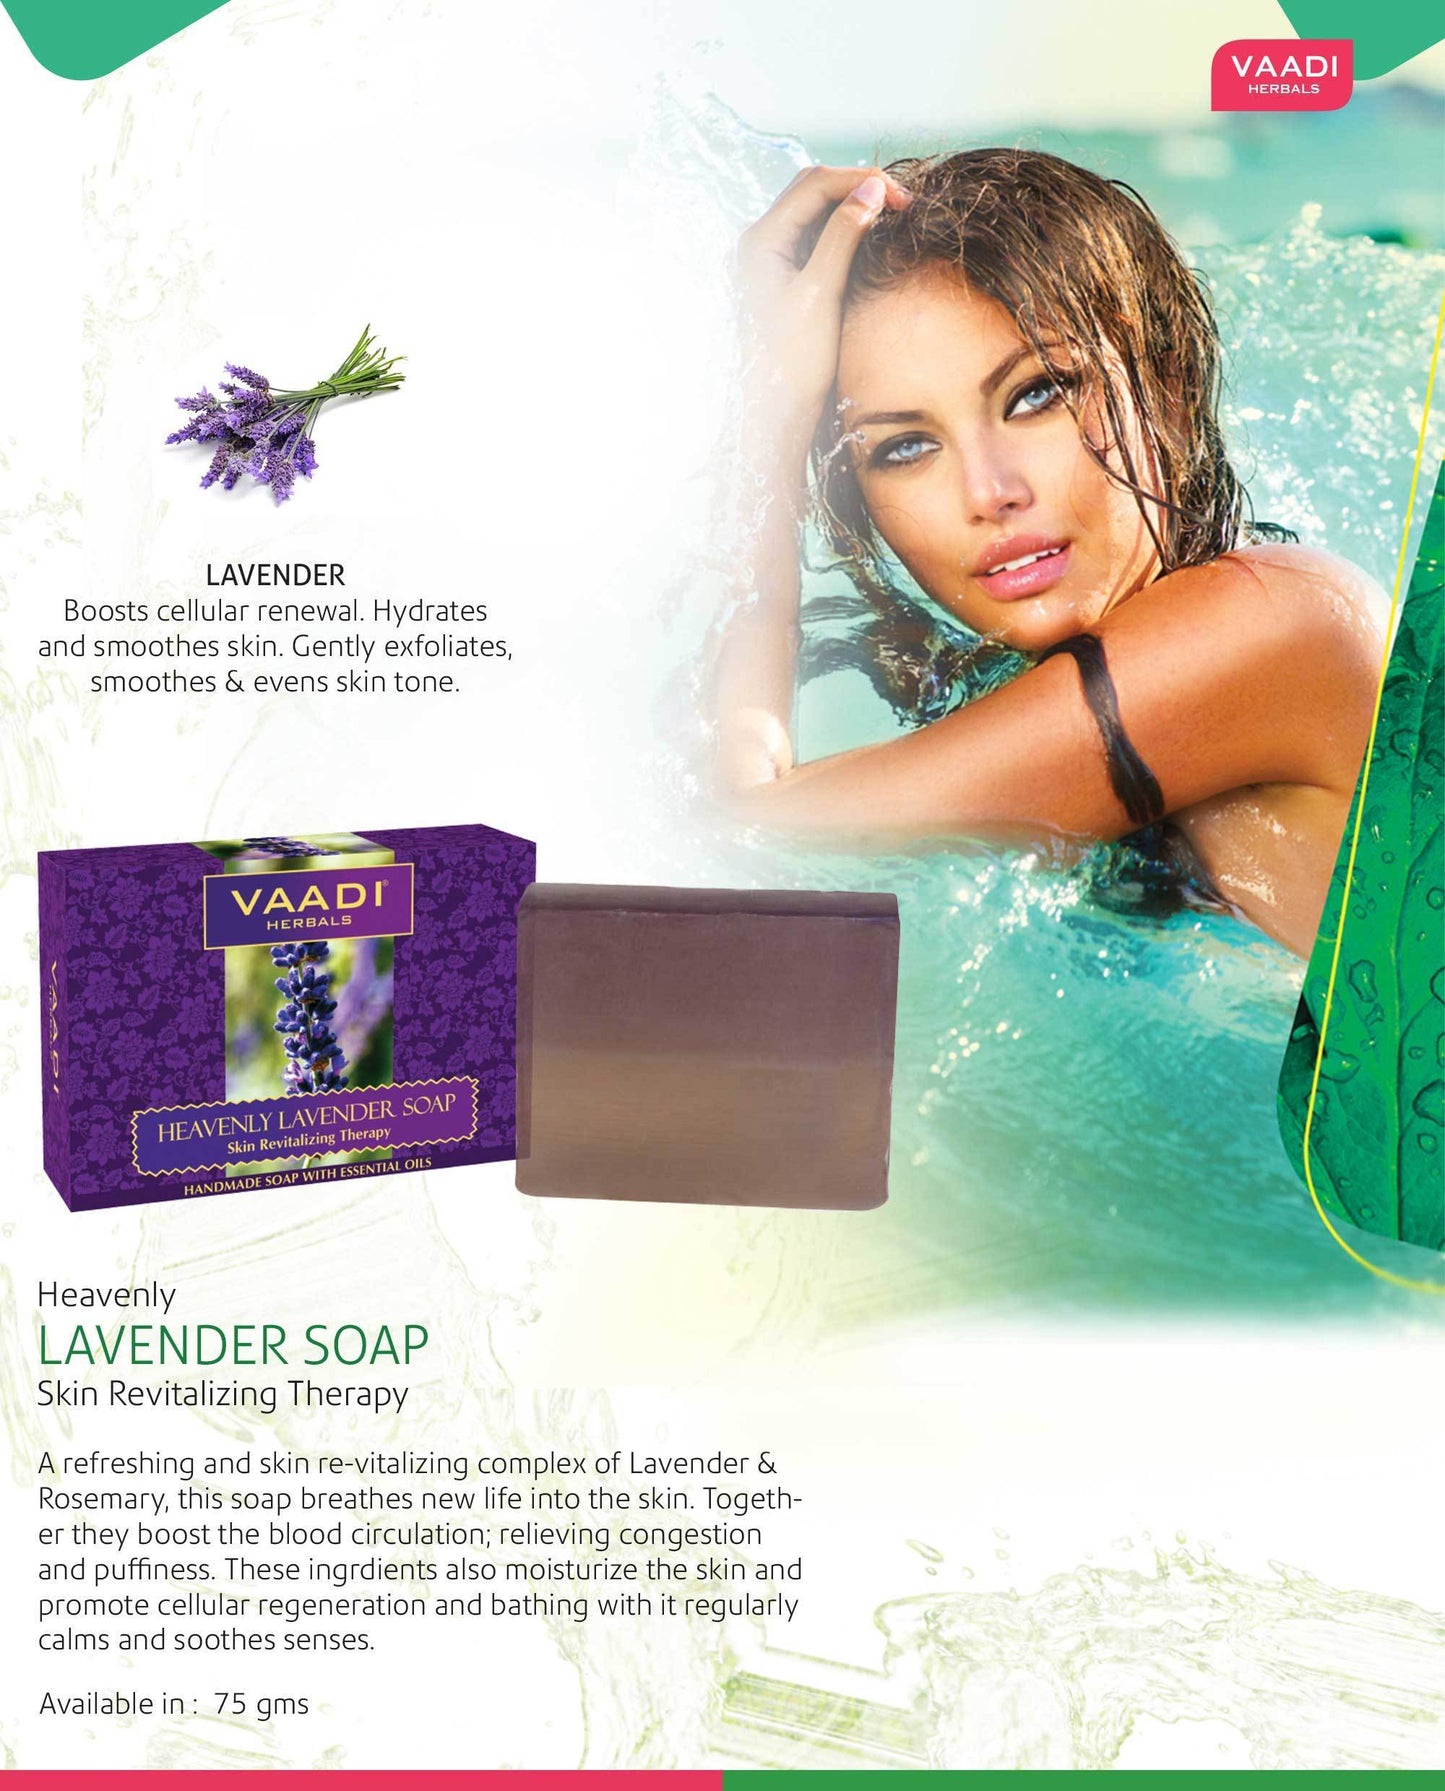 Heavenly Organic Lavender Soap with Rosemary - Revitalizes & Hydrates Skin ( 75 gms / 2.7 oz)- (Buy 1 Get 1 Free)